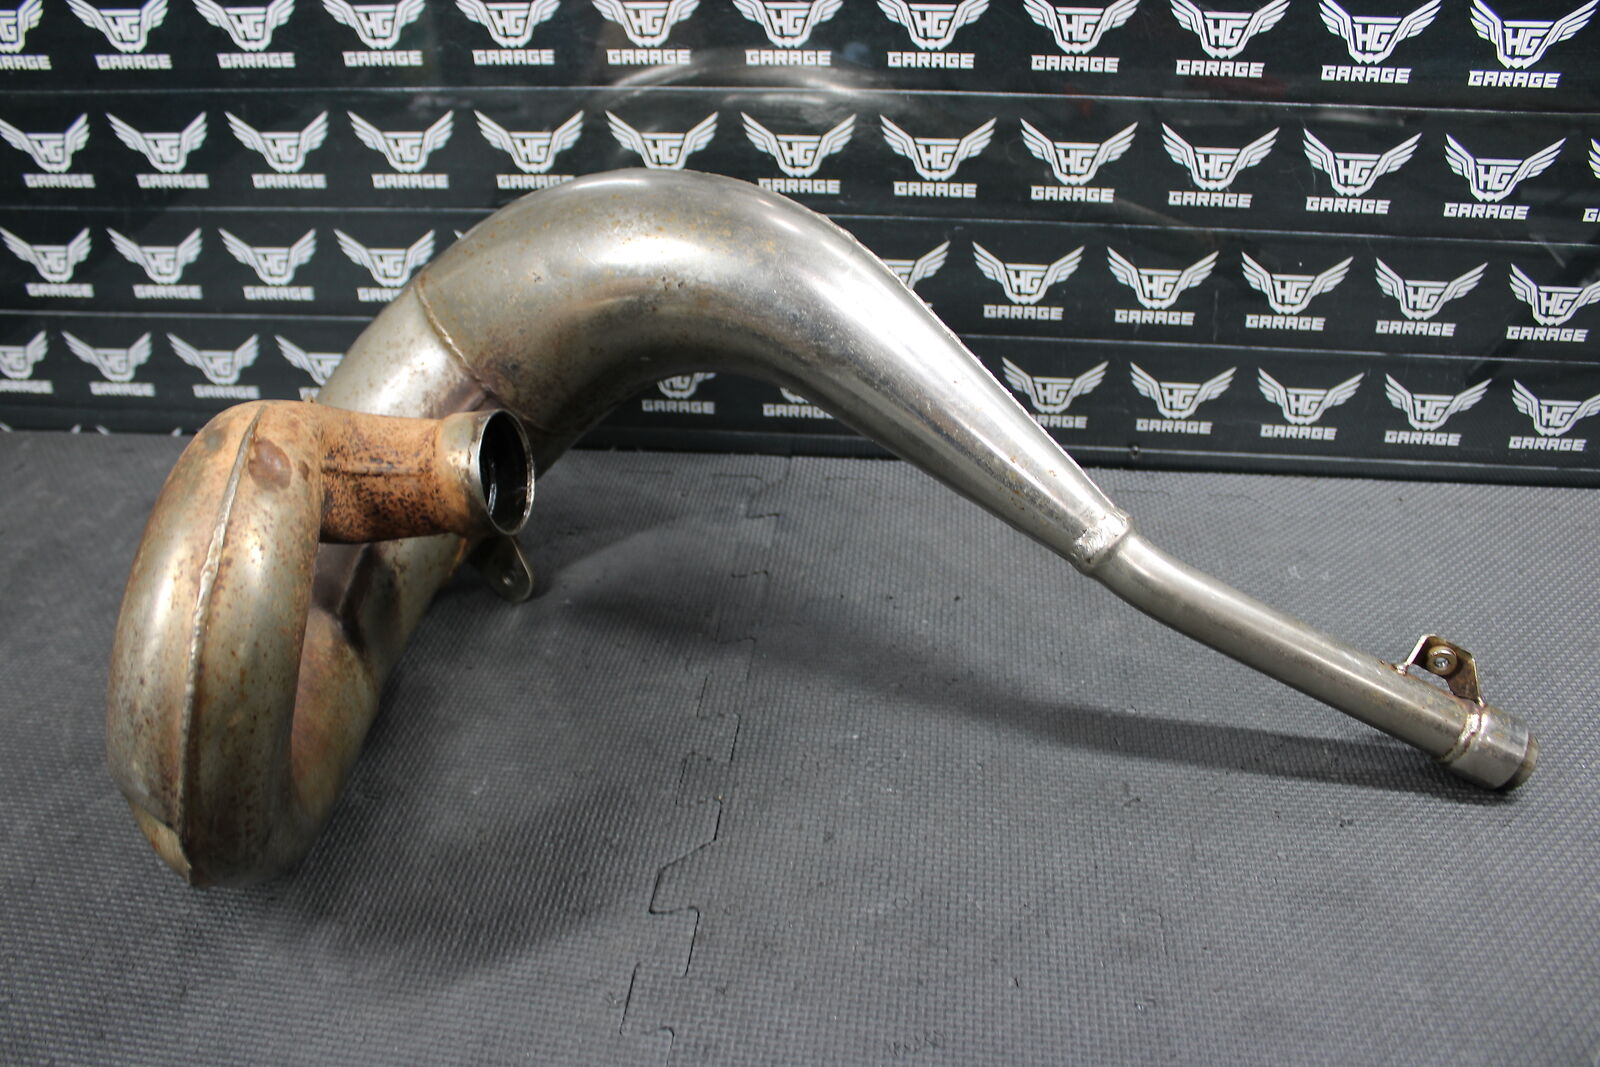 2003 HONDA CR250R FMF GOLD SERIES GNARLY EXHAUST PIPE EXPANSION CHAMBER HEADER